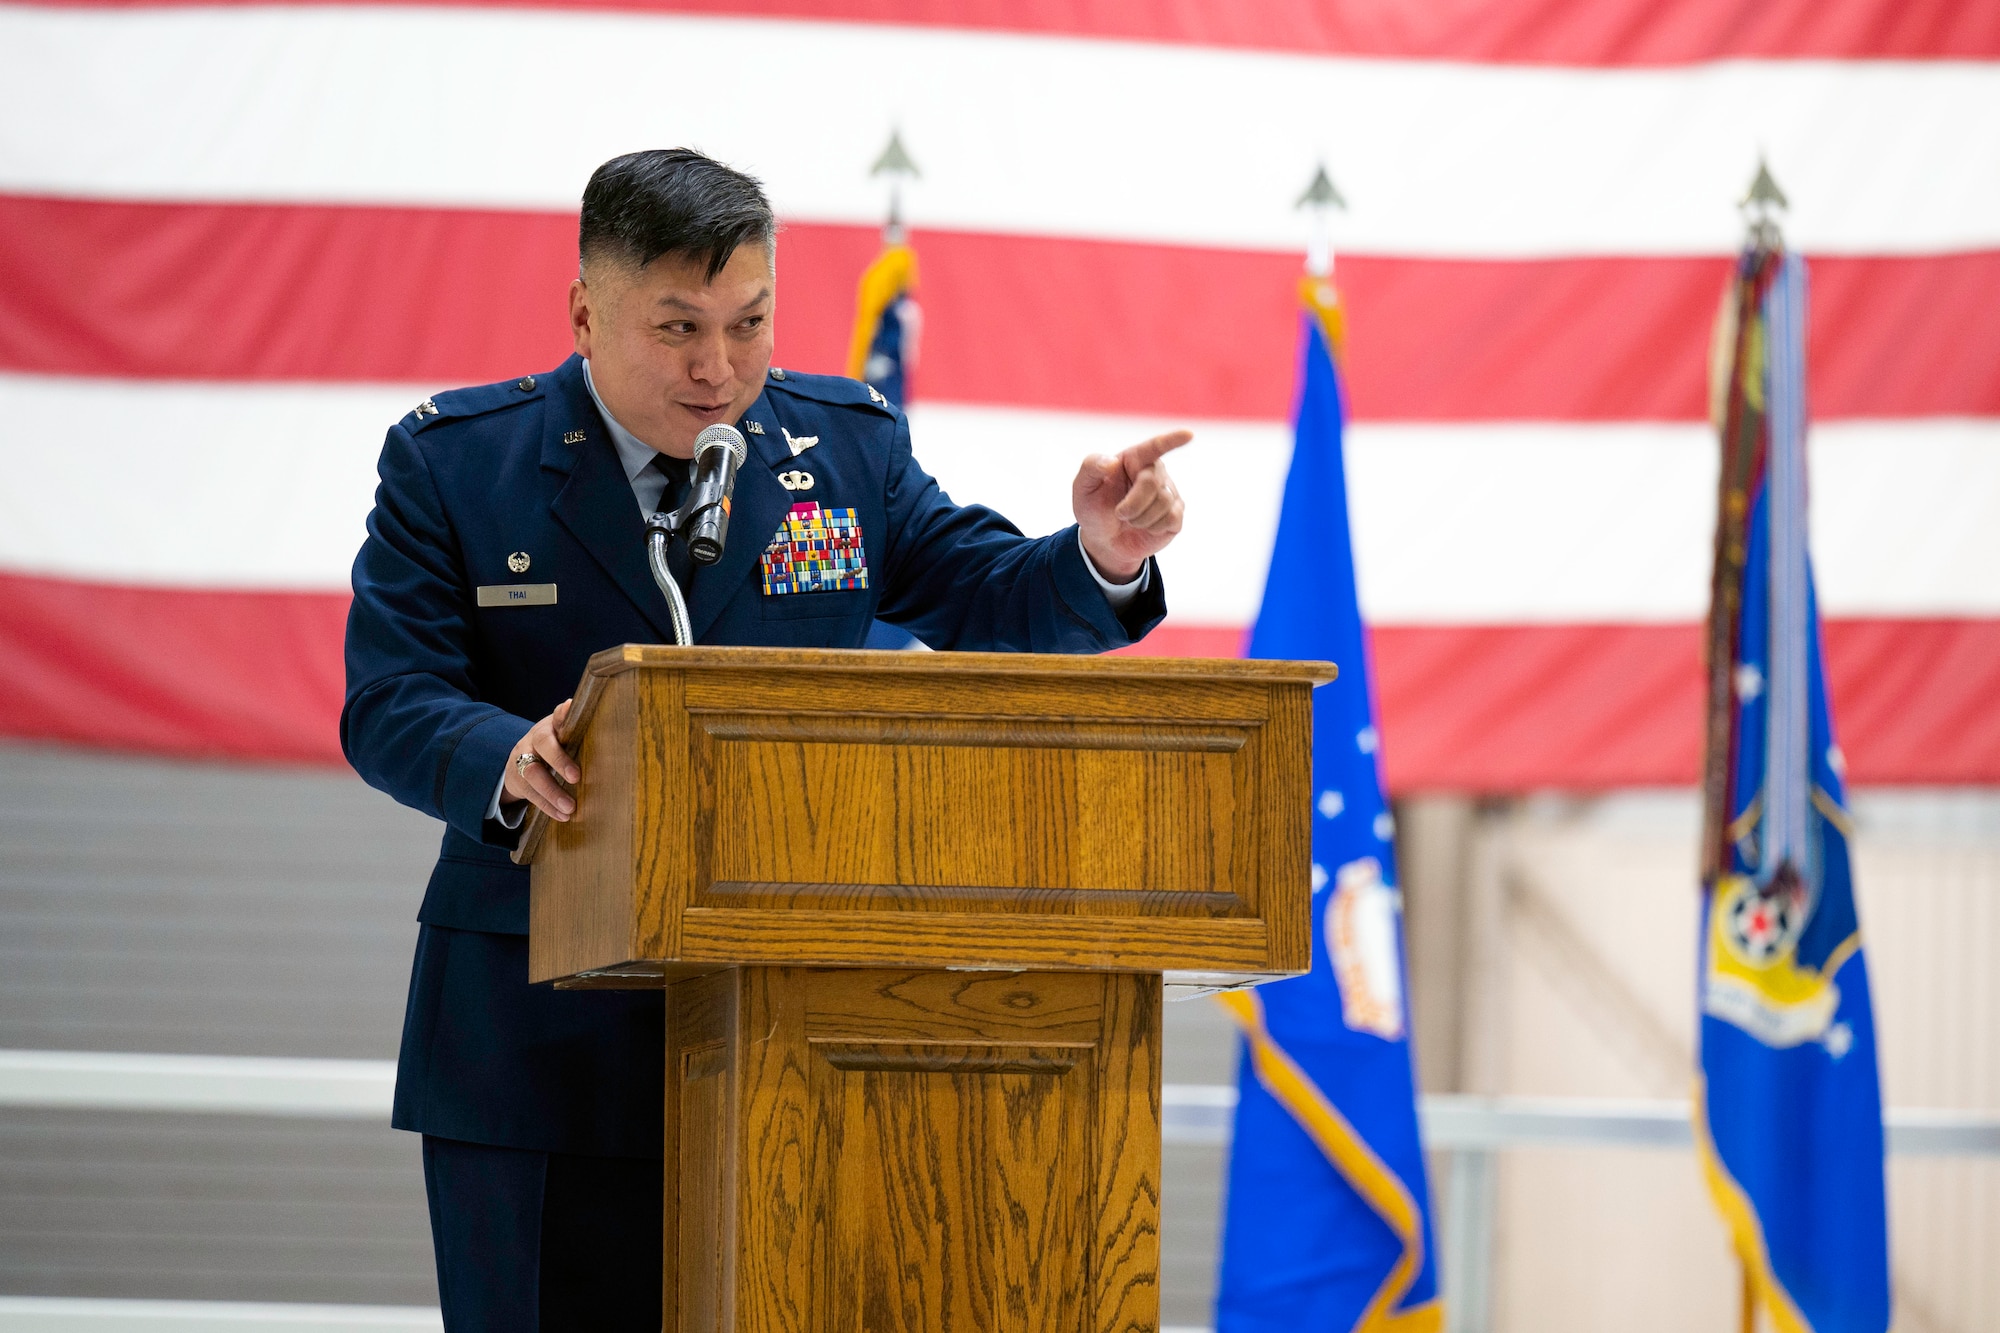 Col. Van Thai, incoming 434th Air Refueling Wing commander, delivers remarks to members of the 434th Air Refueling Wing during a change of command ceremony.